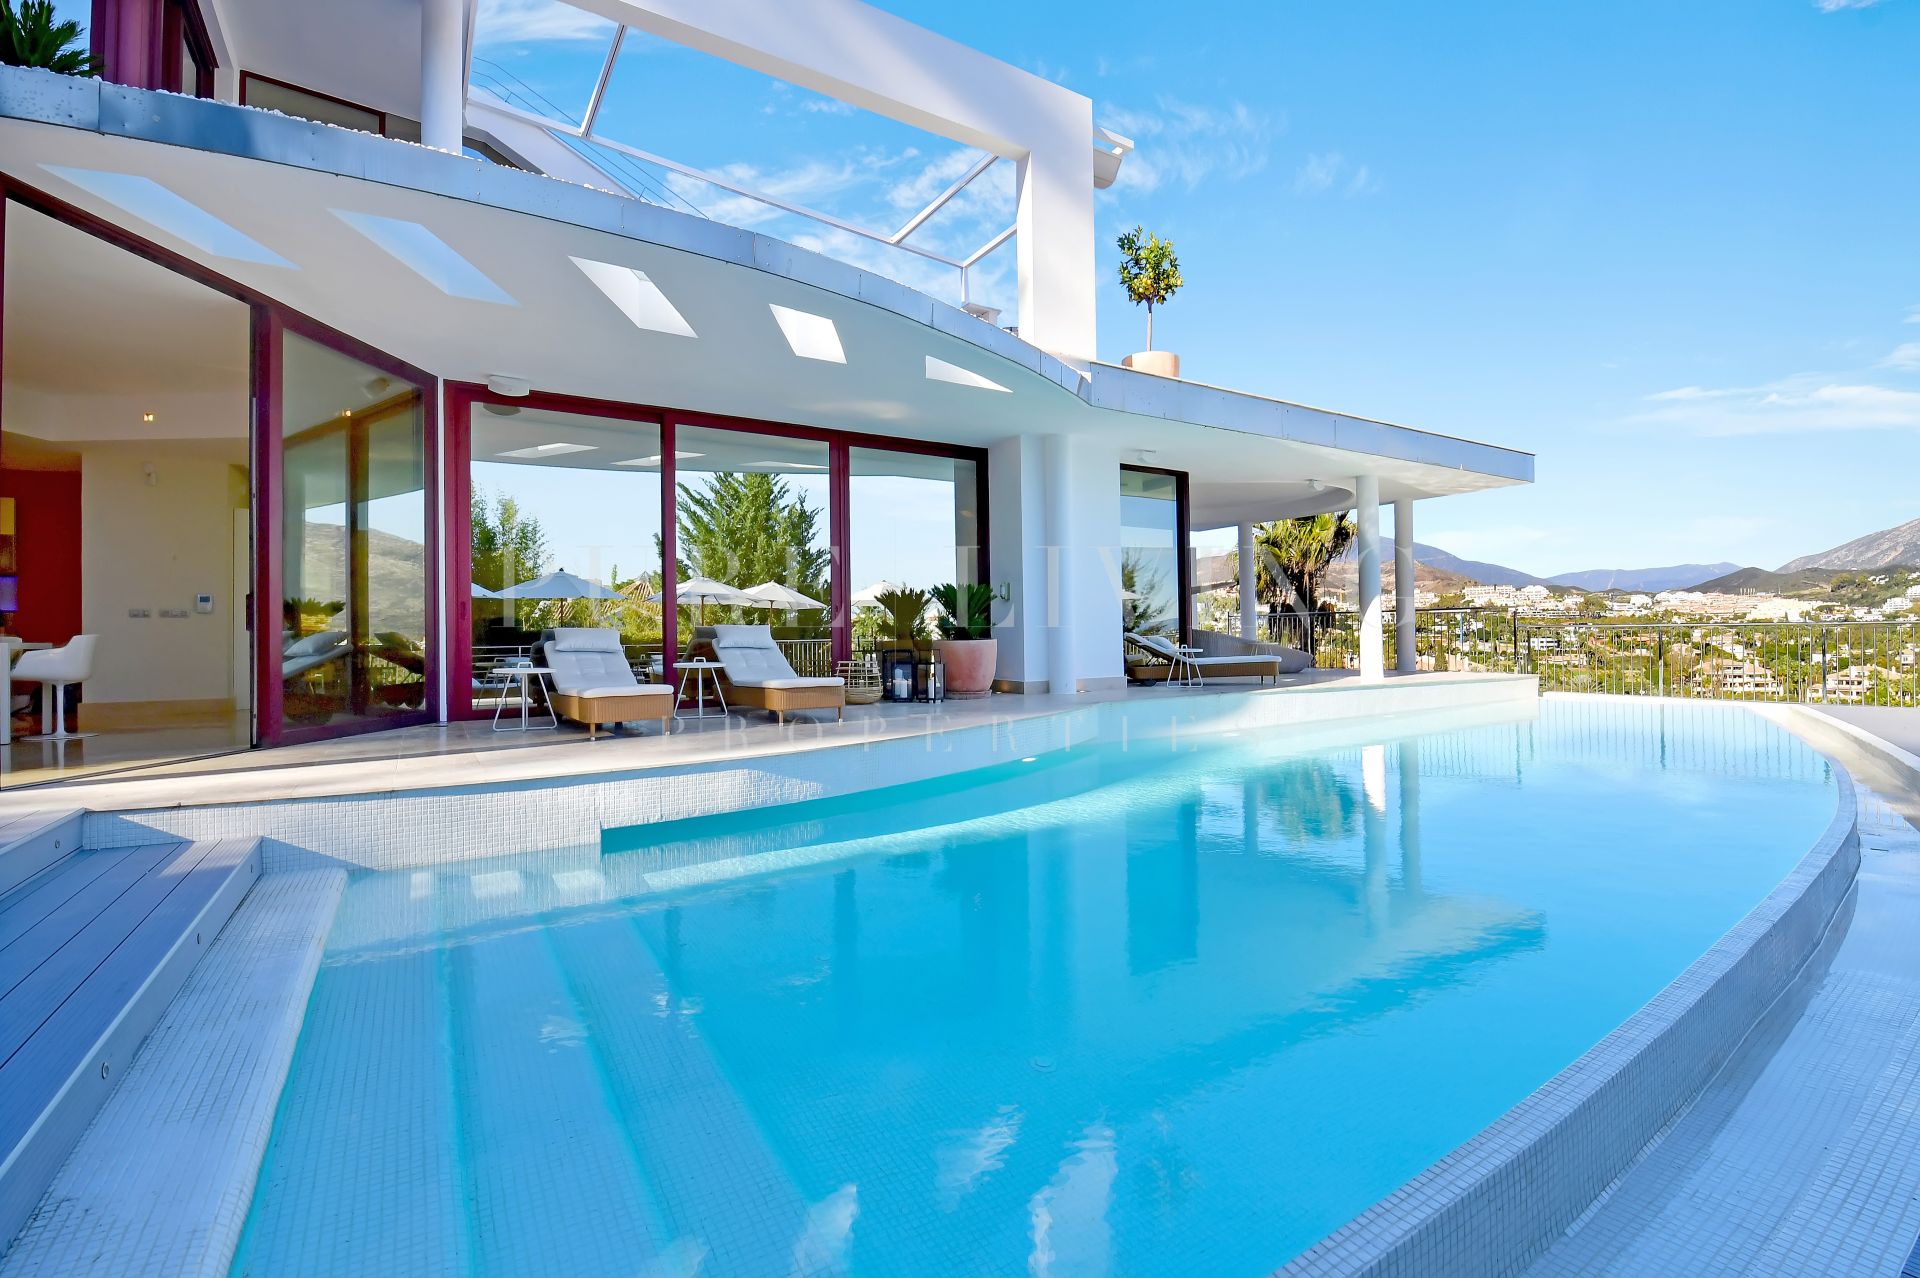 Extraordinary seven bedroom villa with panoramic views in an exclusive area